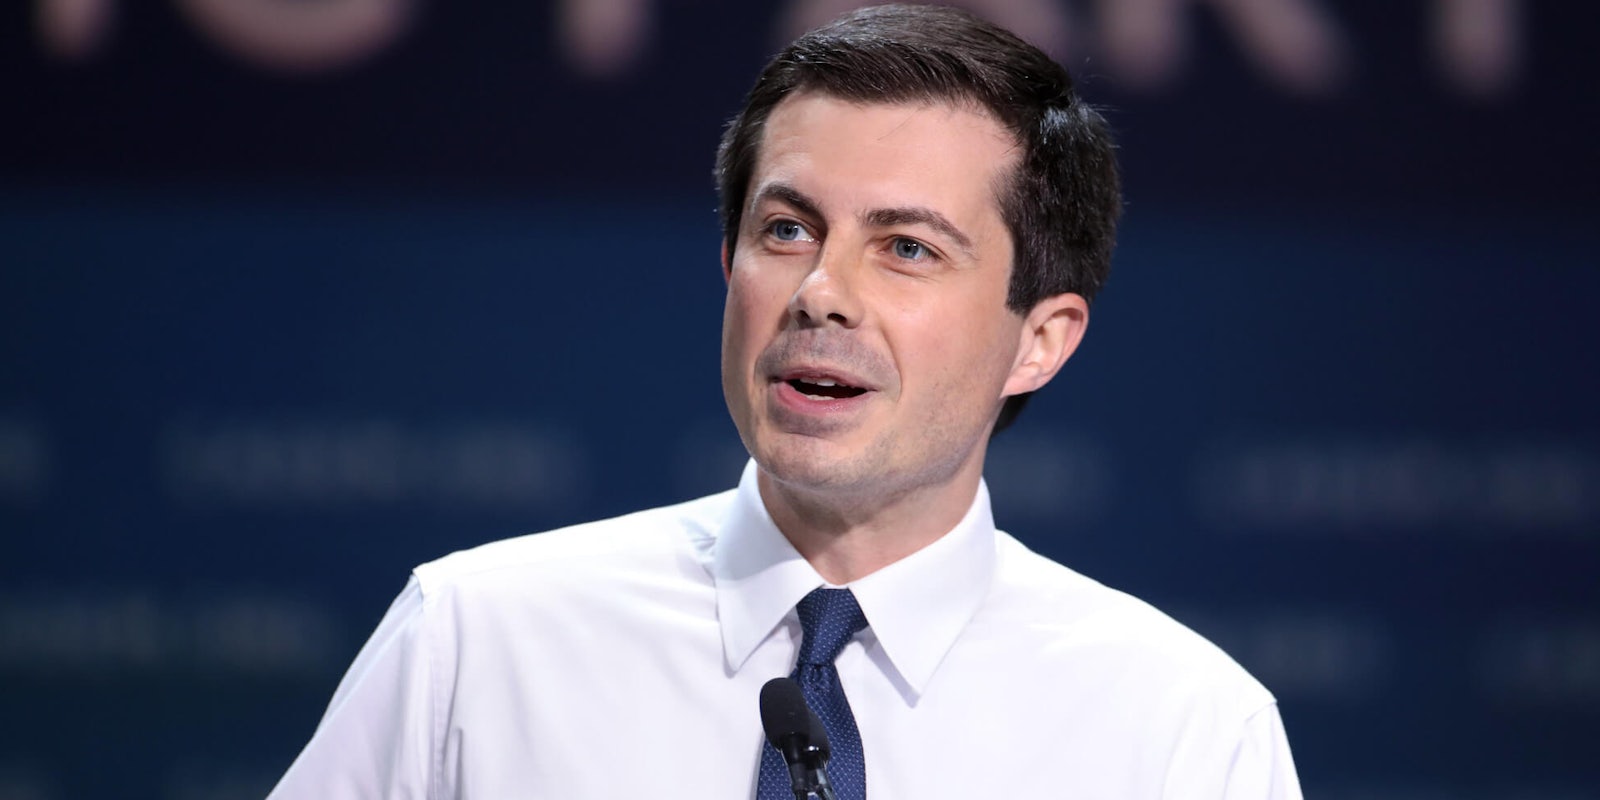 pete buttigieg medicare for all speaking at event